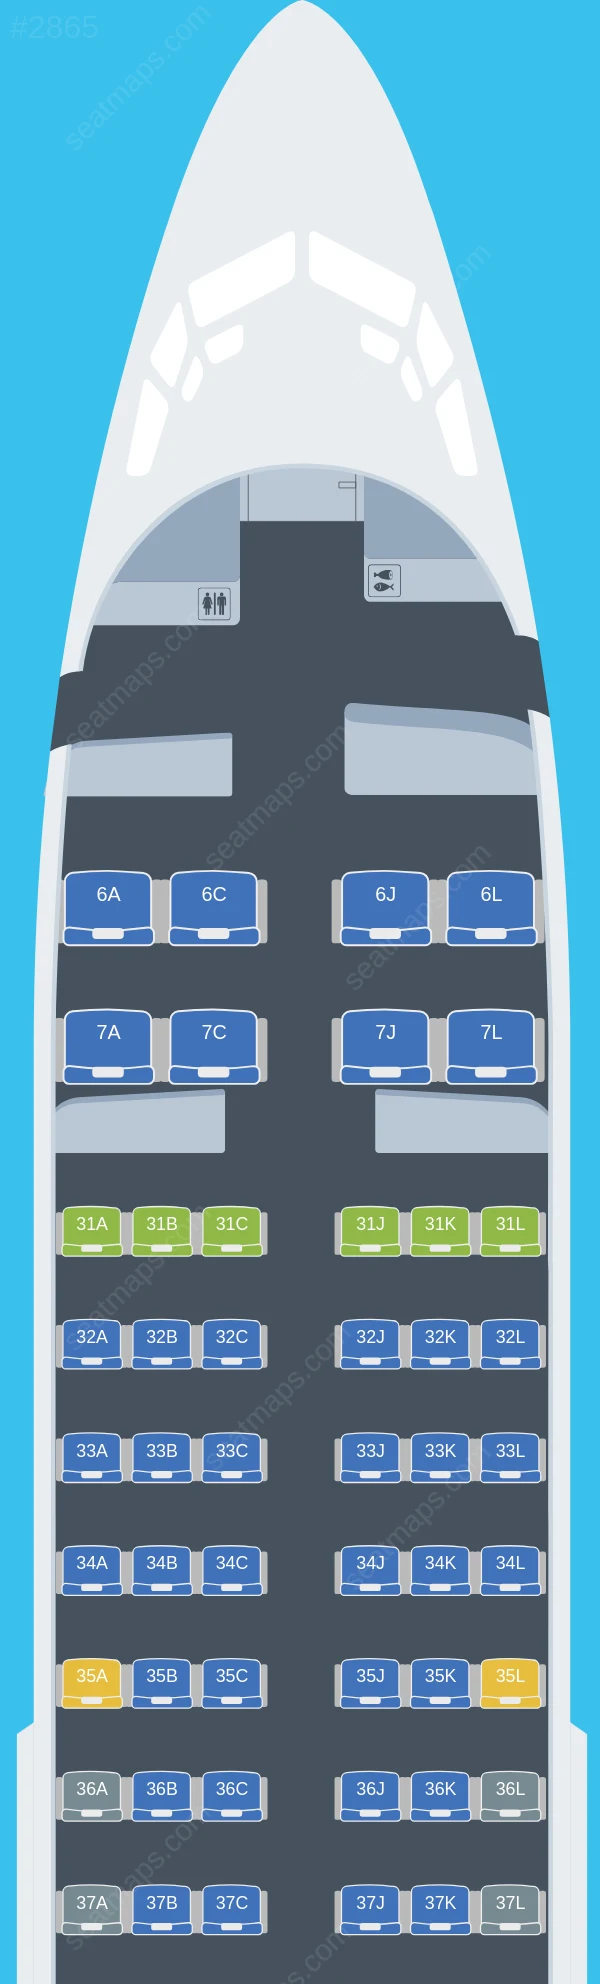 China Eastern Boeing 737-700 seatmap preview